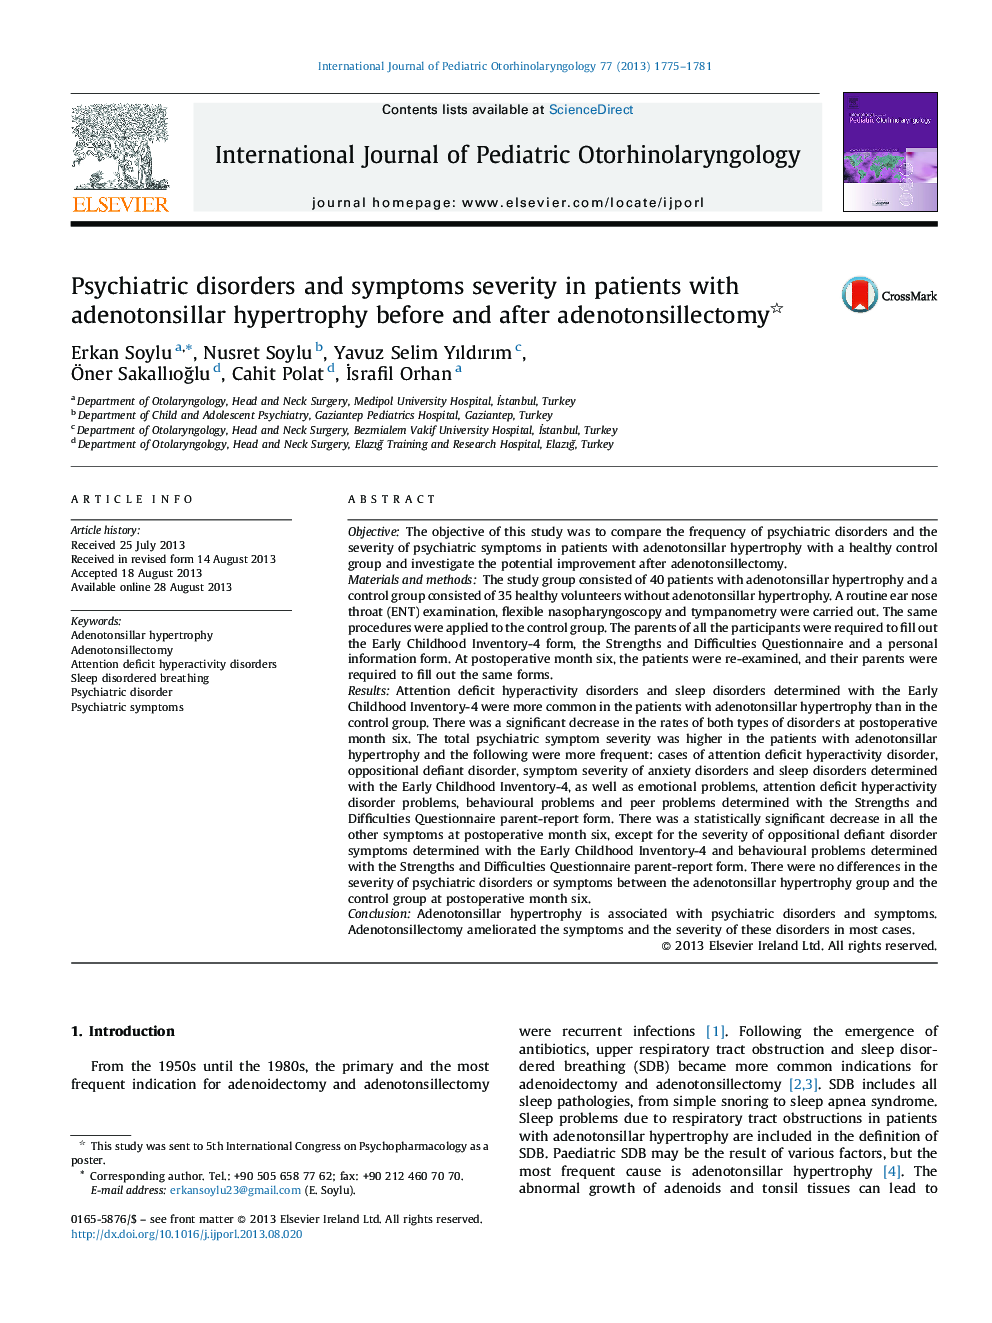 Psychiatric disorders and symptoms severity in patients with adenotonsillar hypertrophy before and after adenotonsillectomy 